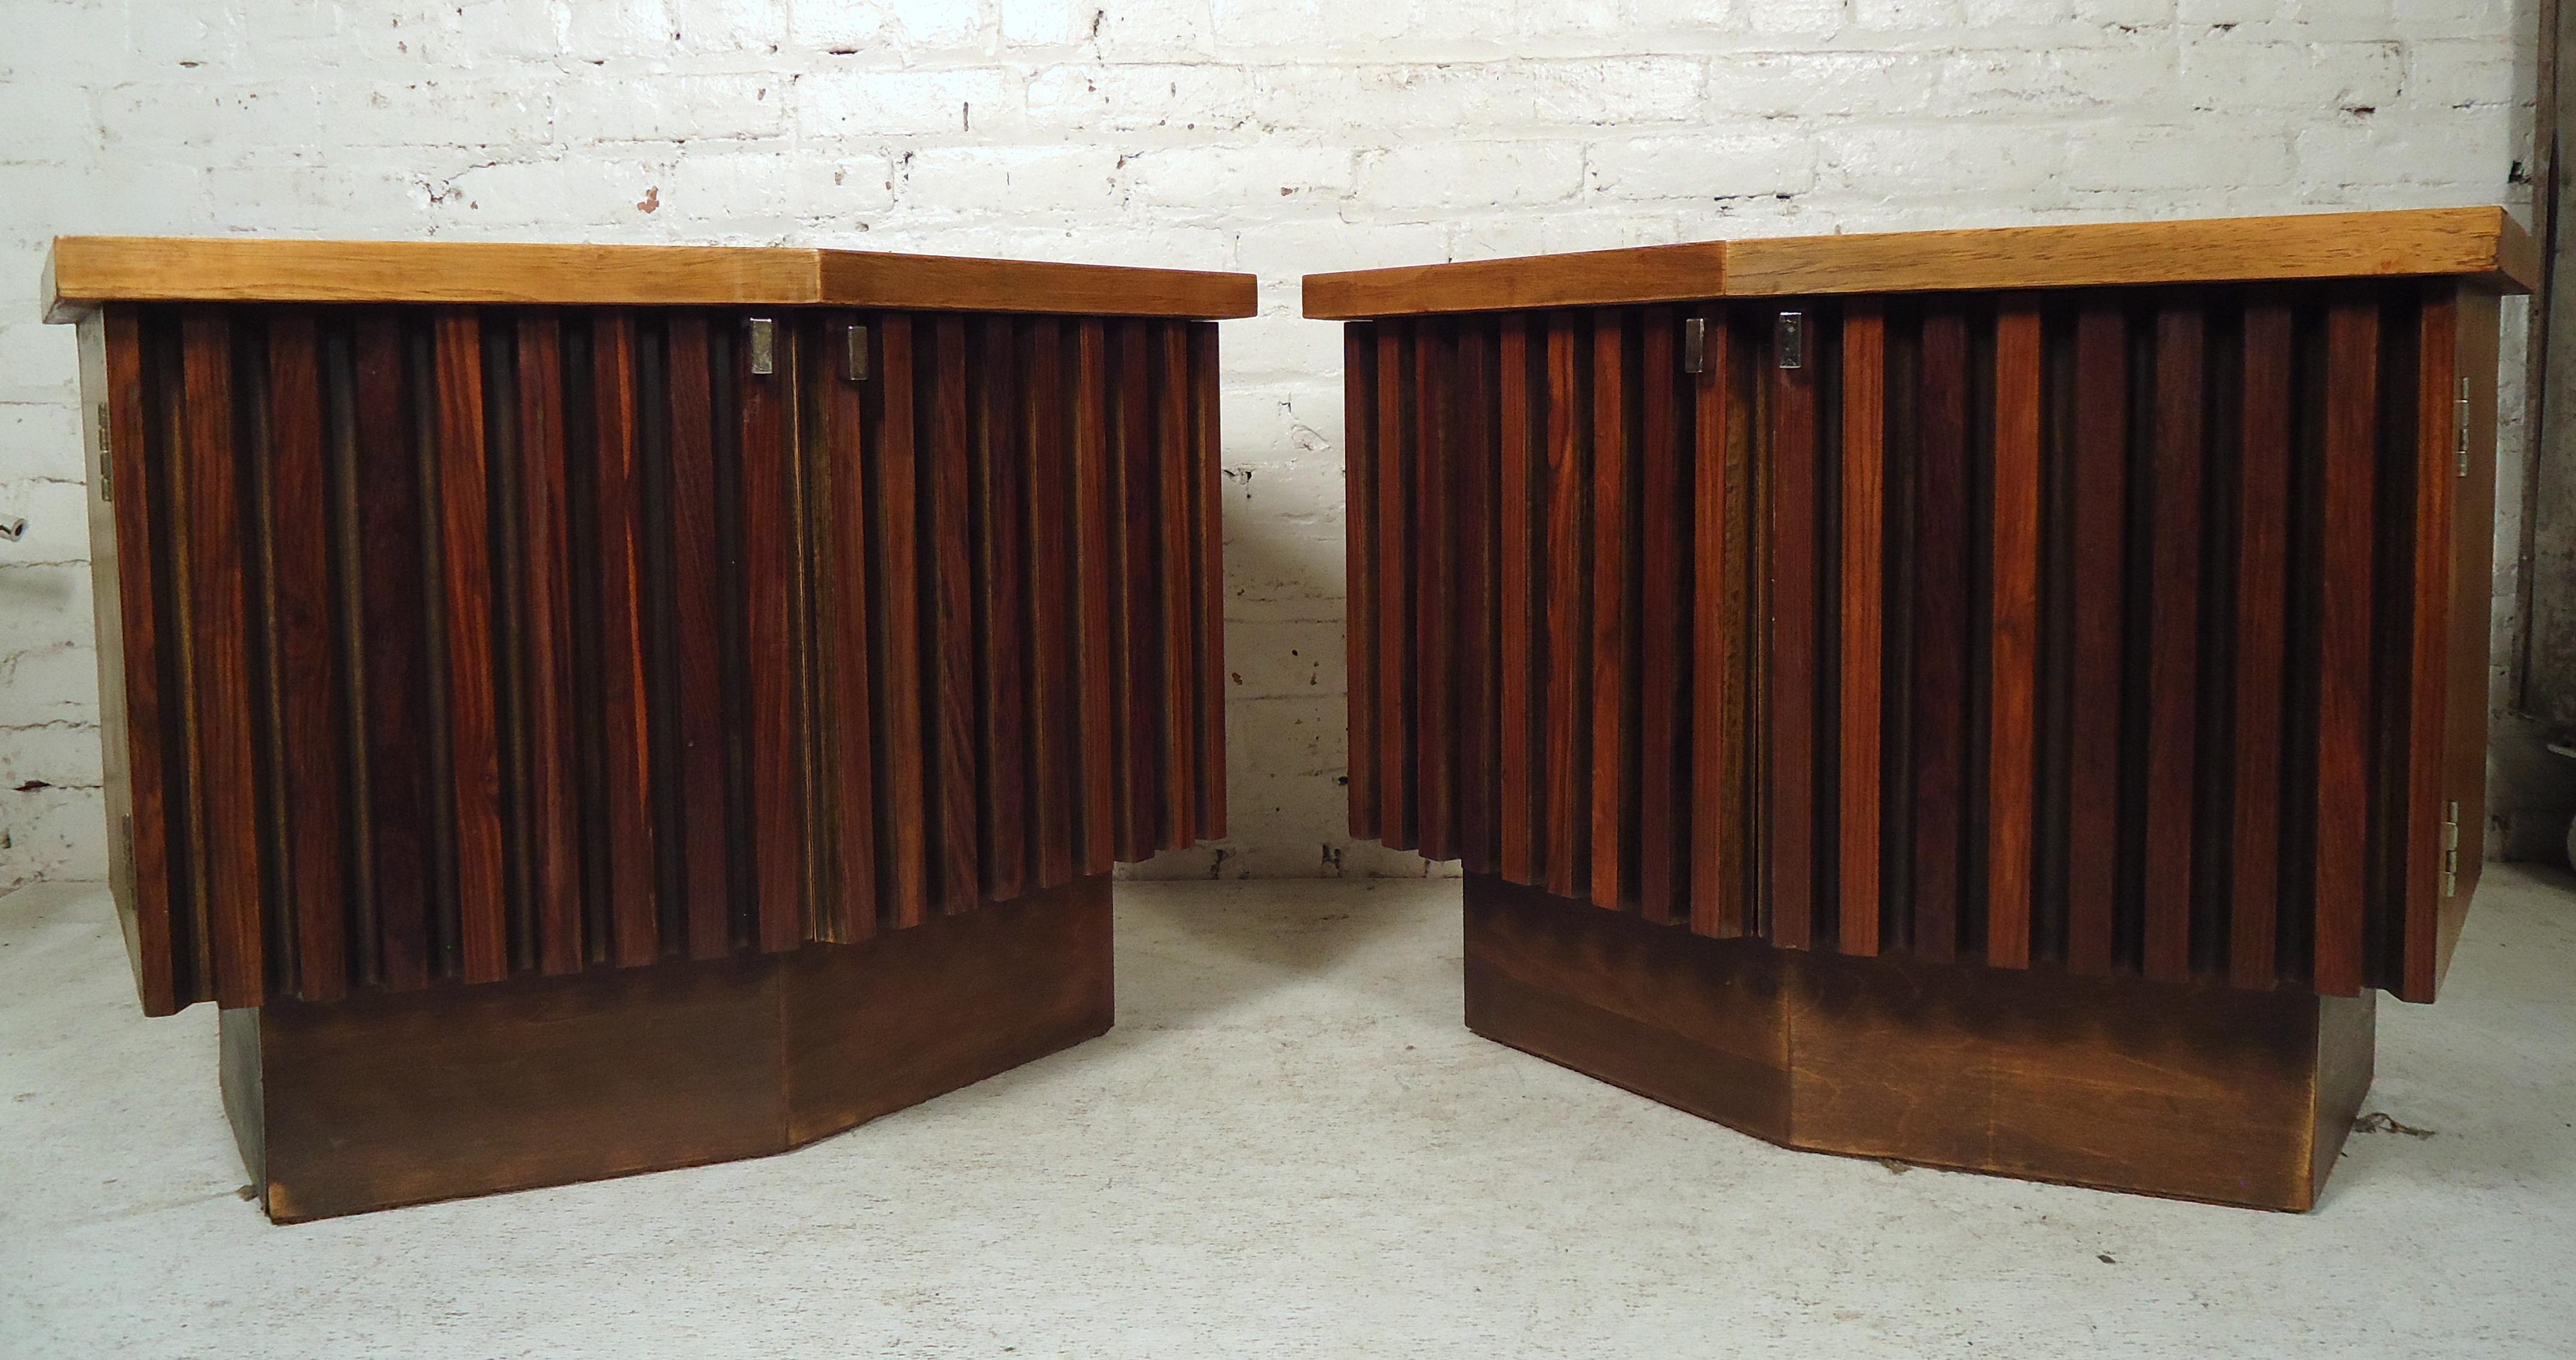 Pair of Mid-Century Modern nightstands featuring a uniquely slatted front, an inlay design to the top, and a spacious cabinet space.
Please confirm item location (NY or NJ).